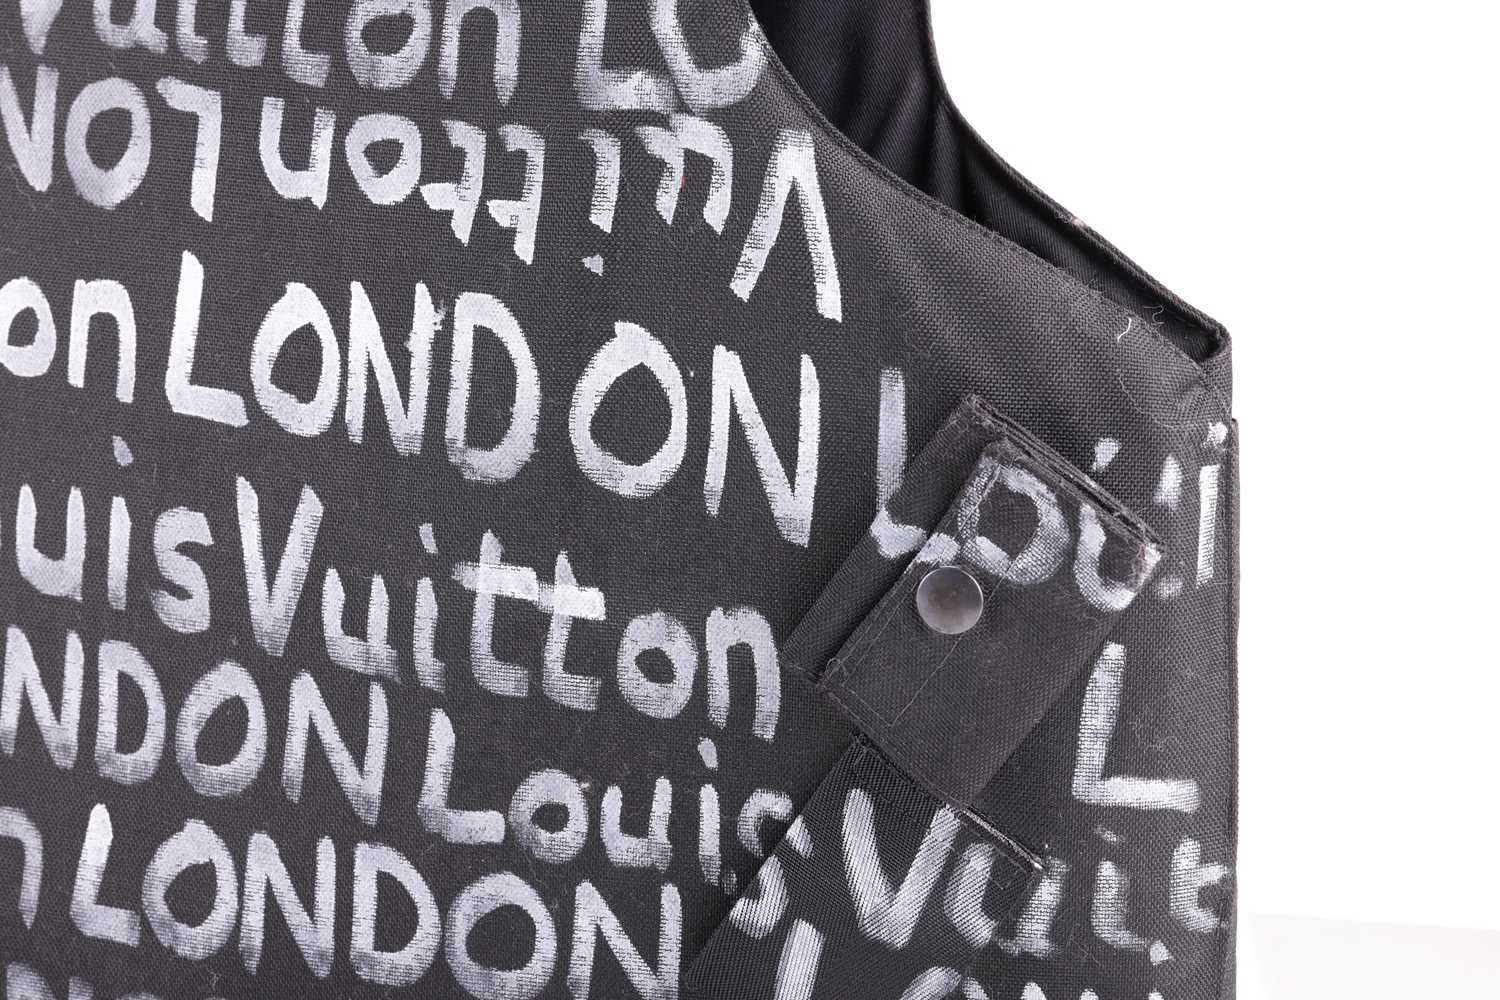 War Boutique (b. 1965), 'Louis Vuitton London', initialled, dated '19 and numbered 1/1 on interior - Image 5 of 9